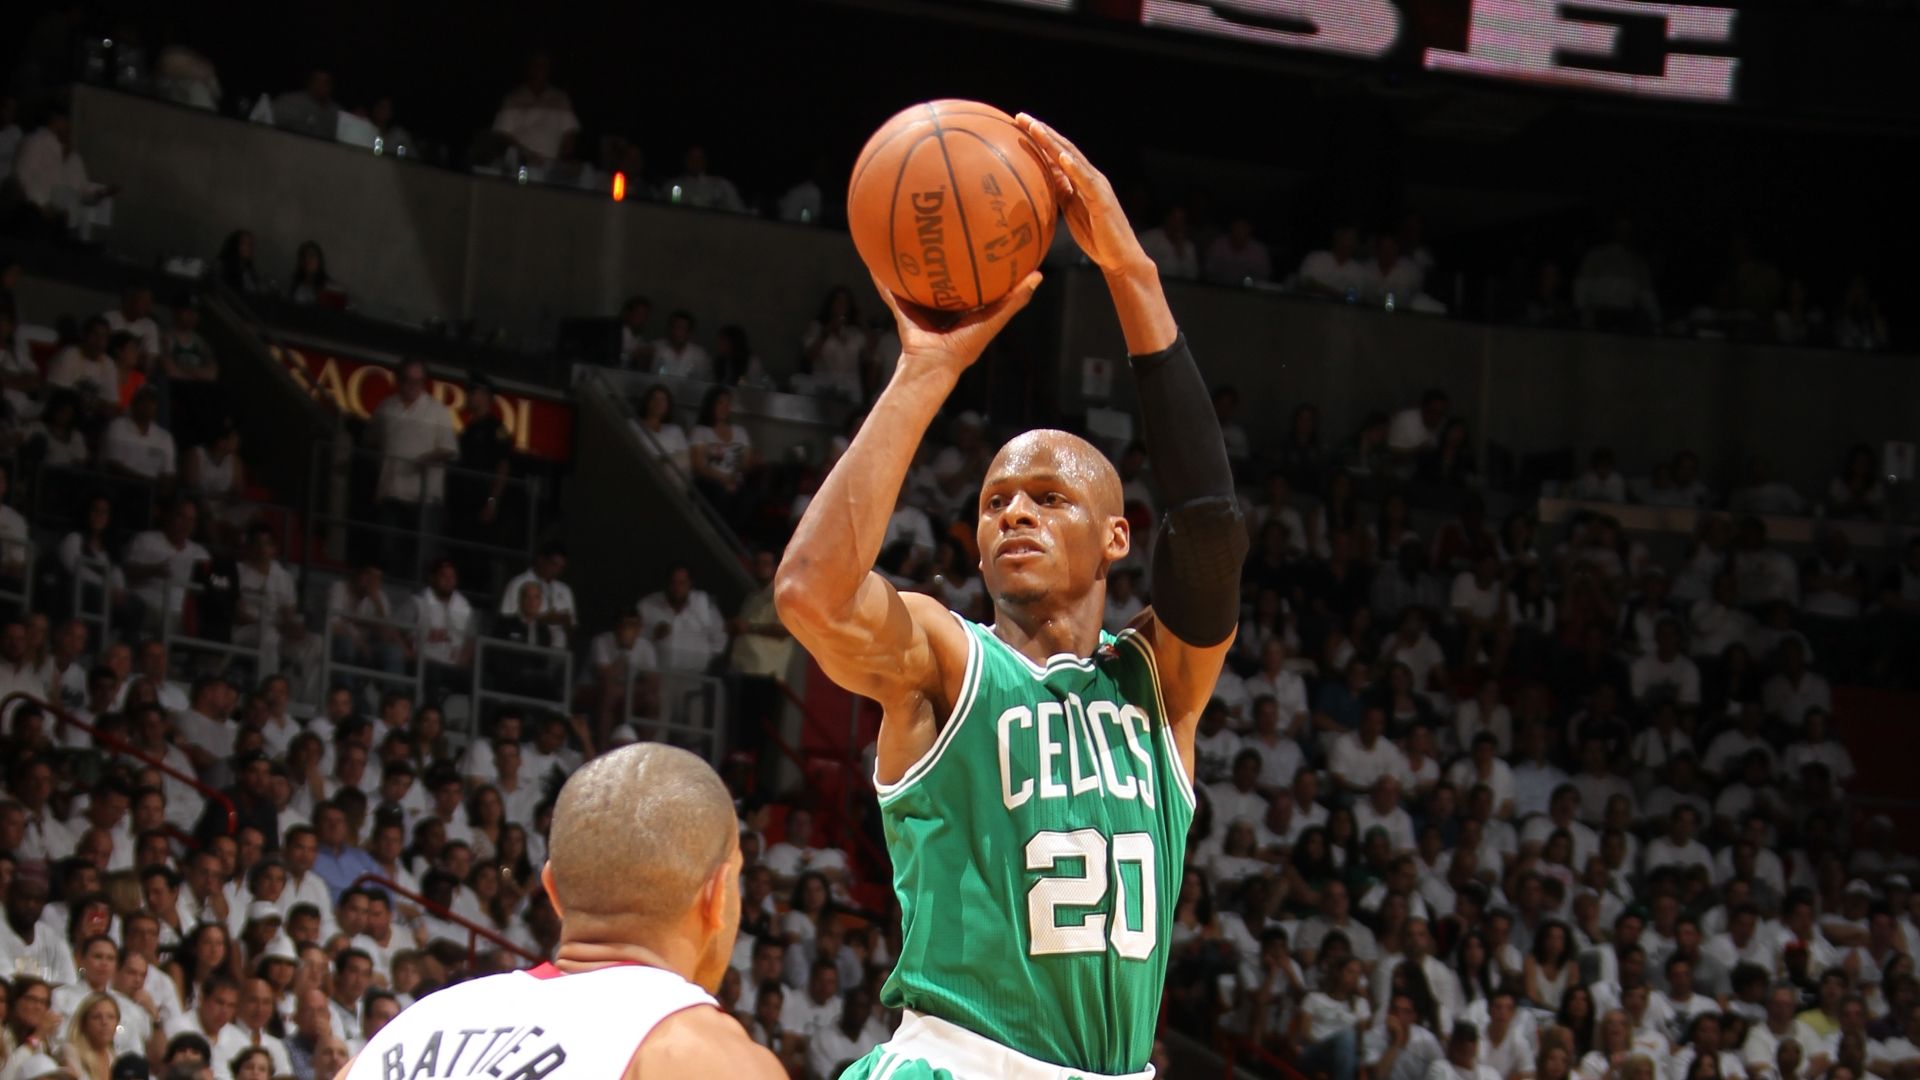 Ray Allen's clutch shooting lands him in Basketball Hall